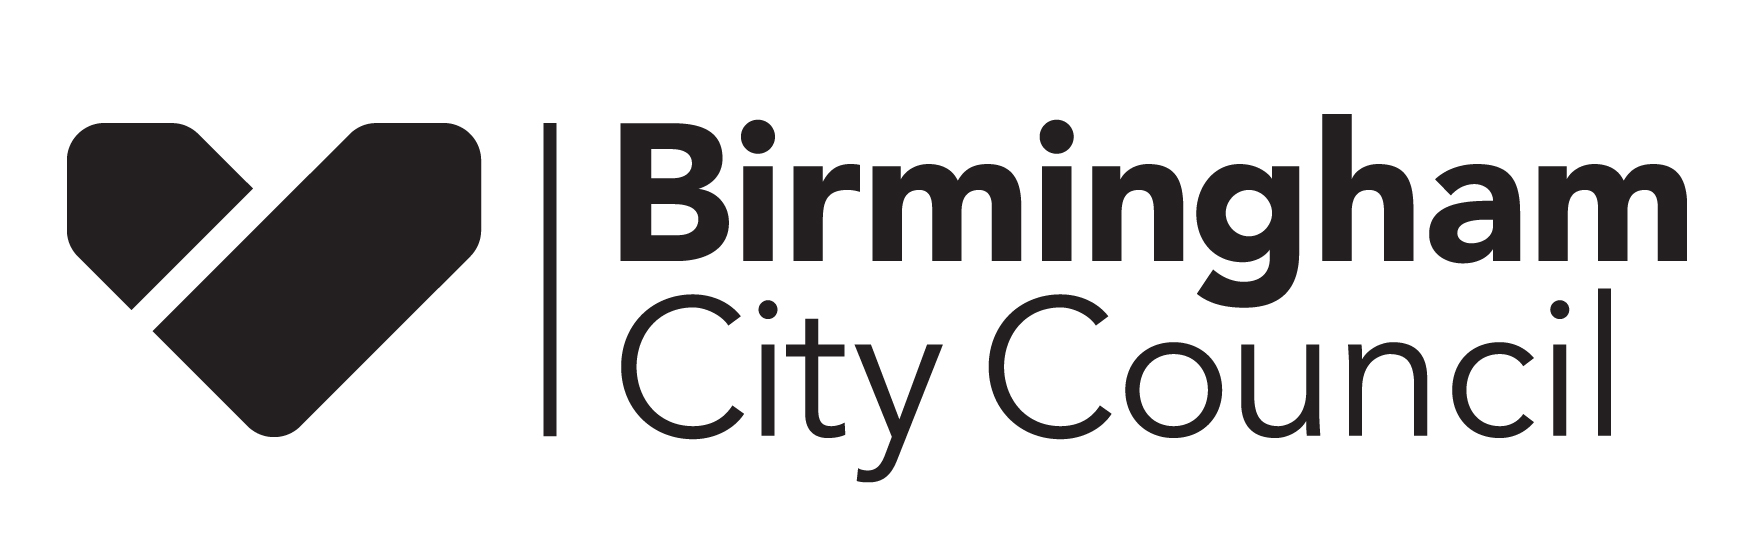 The New Line Up For Birmingham City Council S Cabinet Members